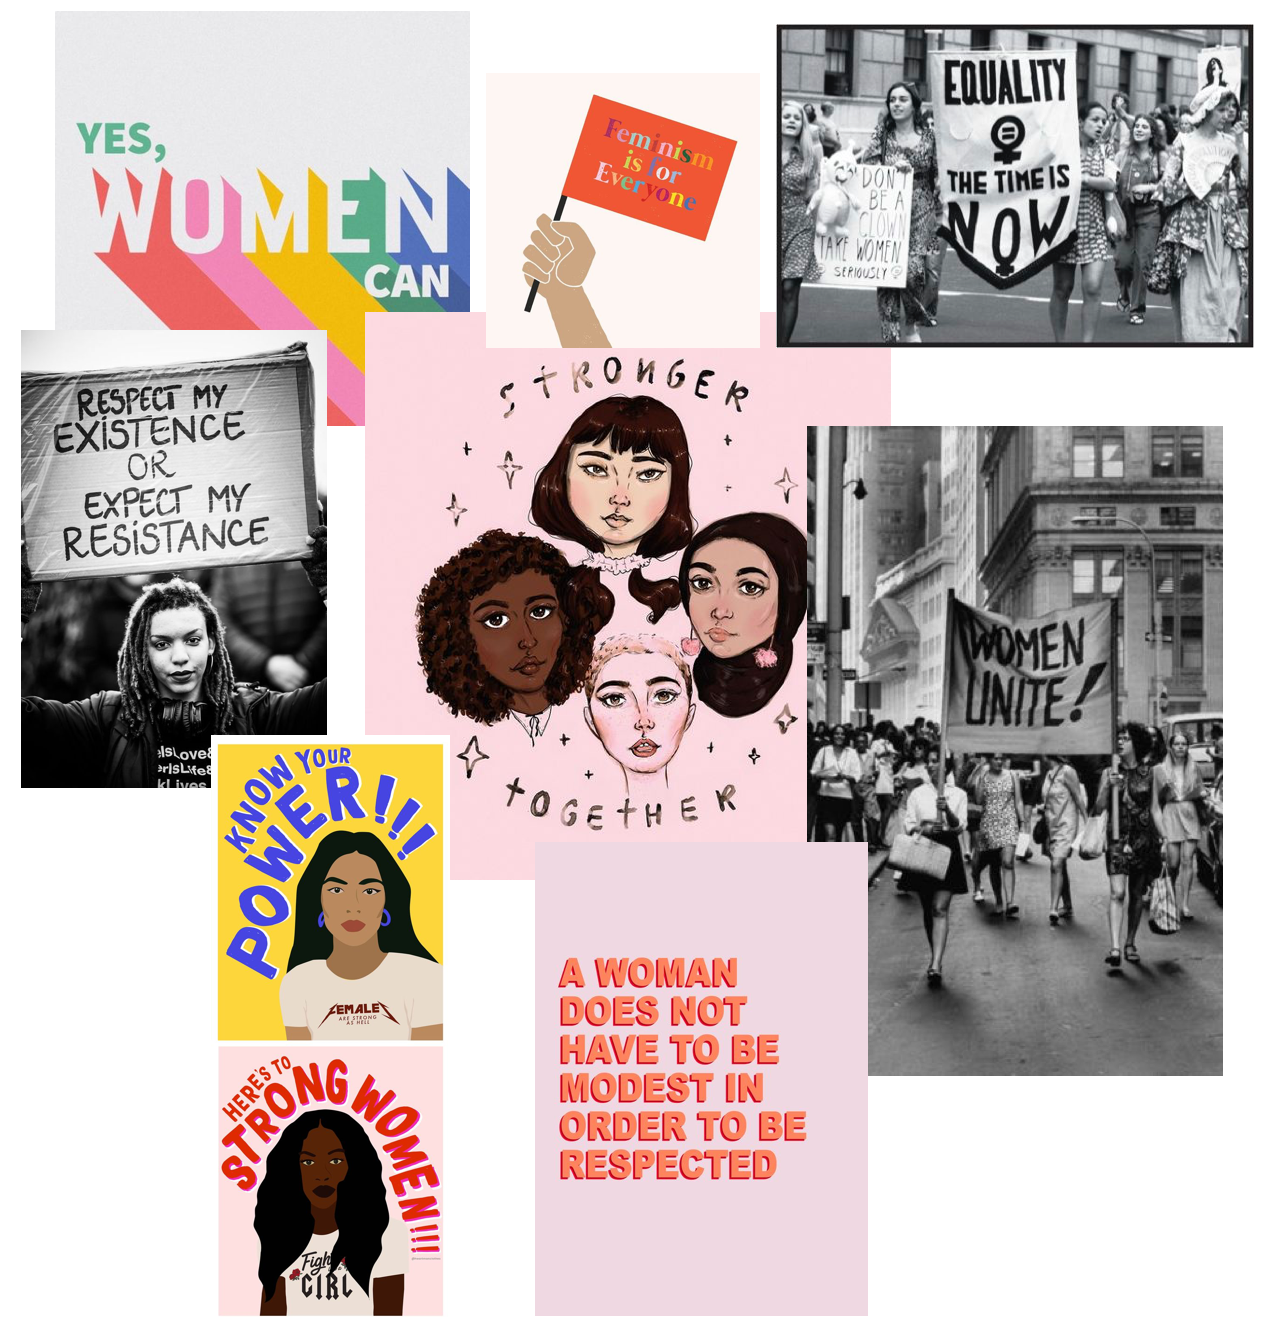 sexism: the everyday, intersectionality and some questions - KatieLou